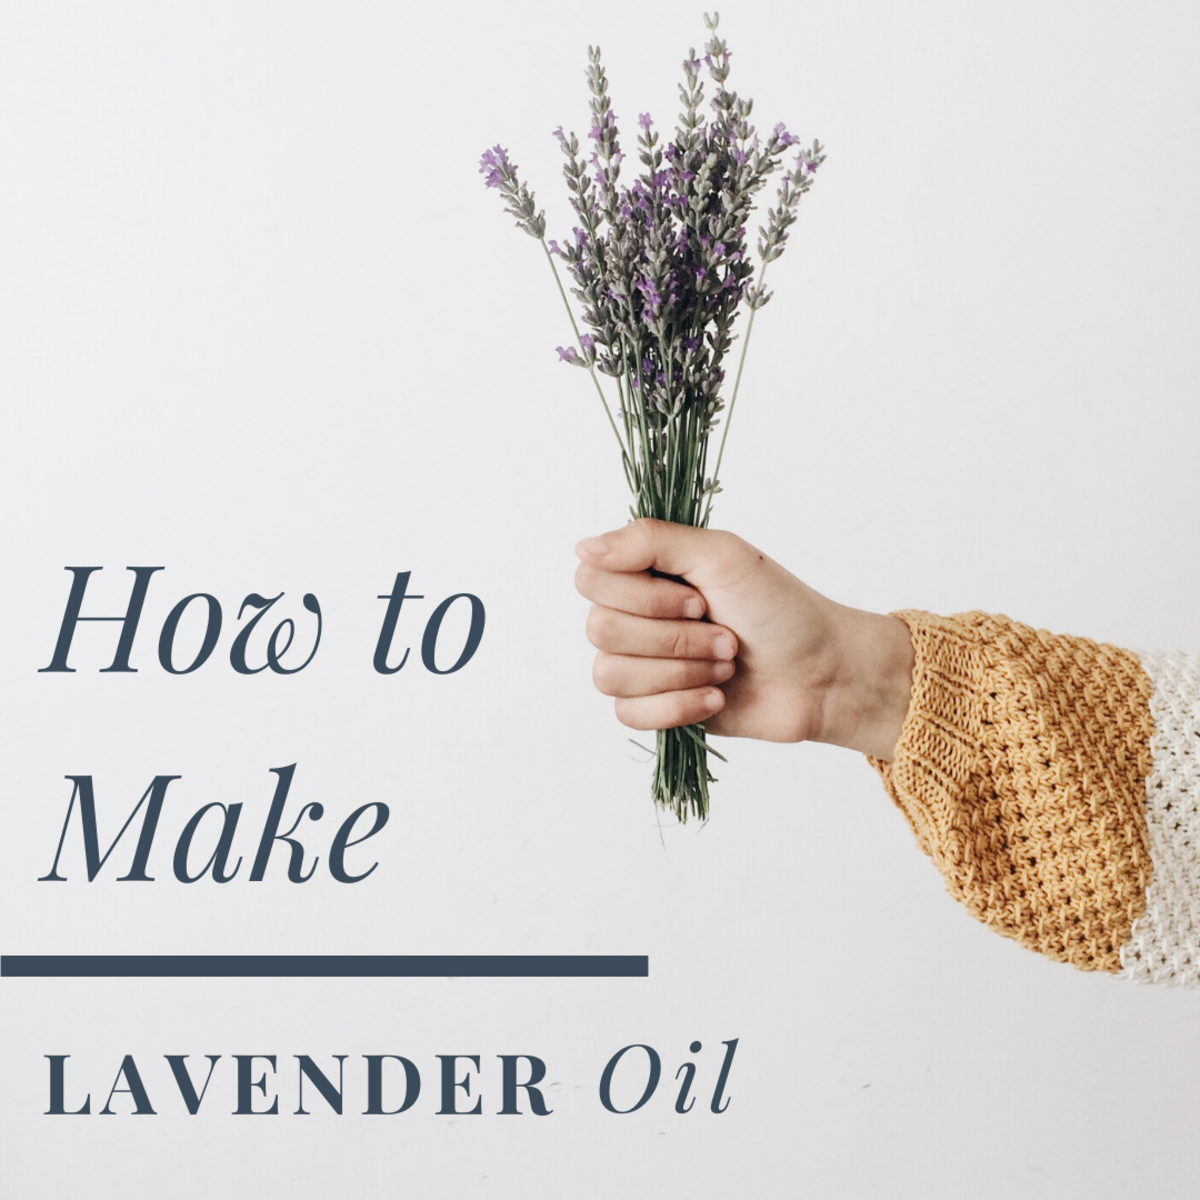 How to Make Lavender Oil at Home